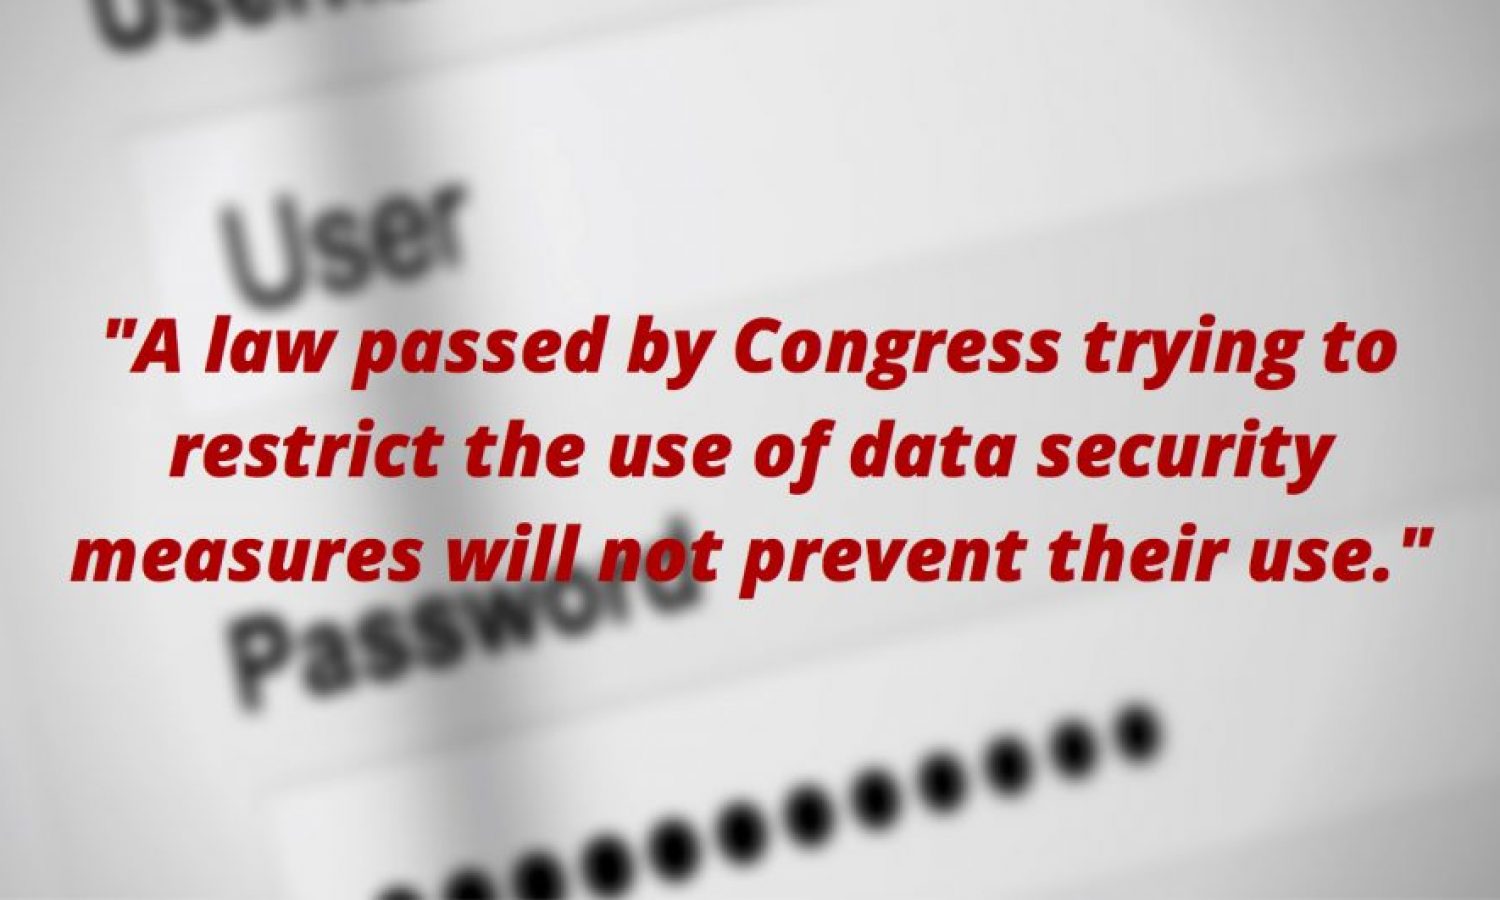 A law passed by Congress trying to restrict the use of data security measures will not prevent their use.